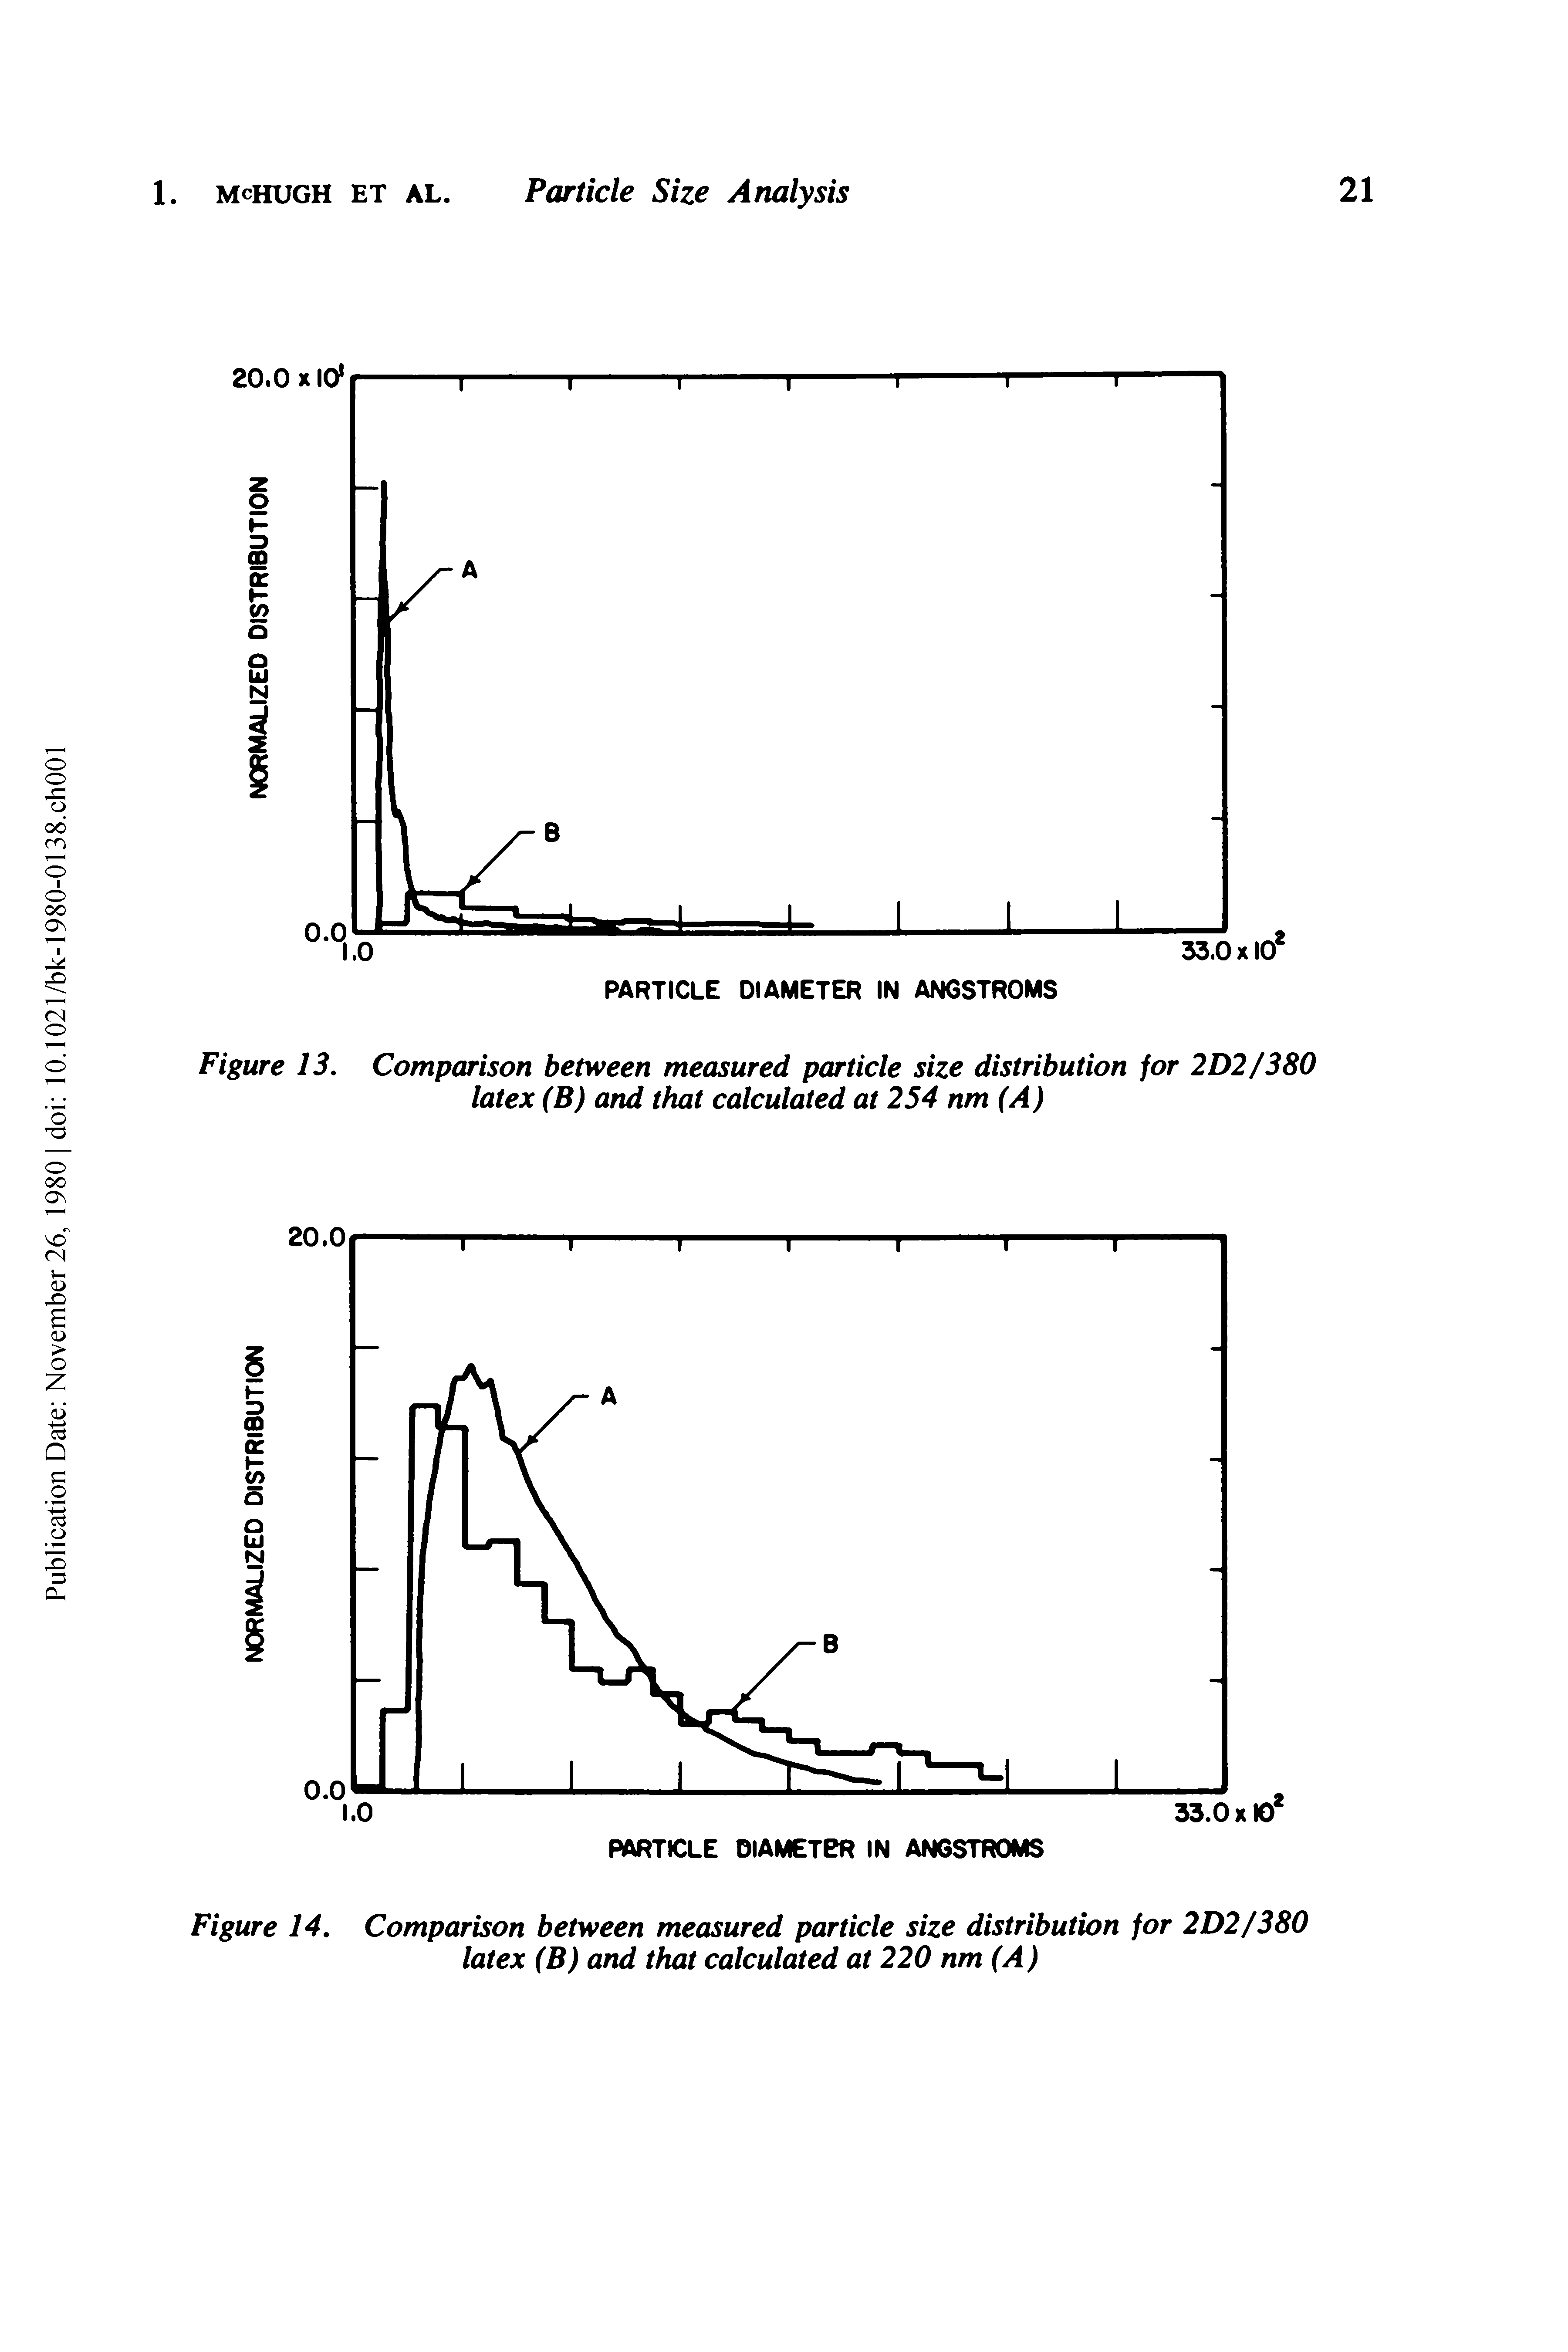 Figure 13. Comparison between measured particle size distribution for 2D2/380 latex (B) and that calculated at 254 nm (A)...